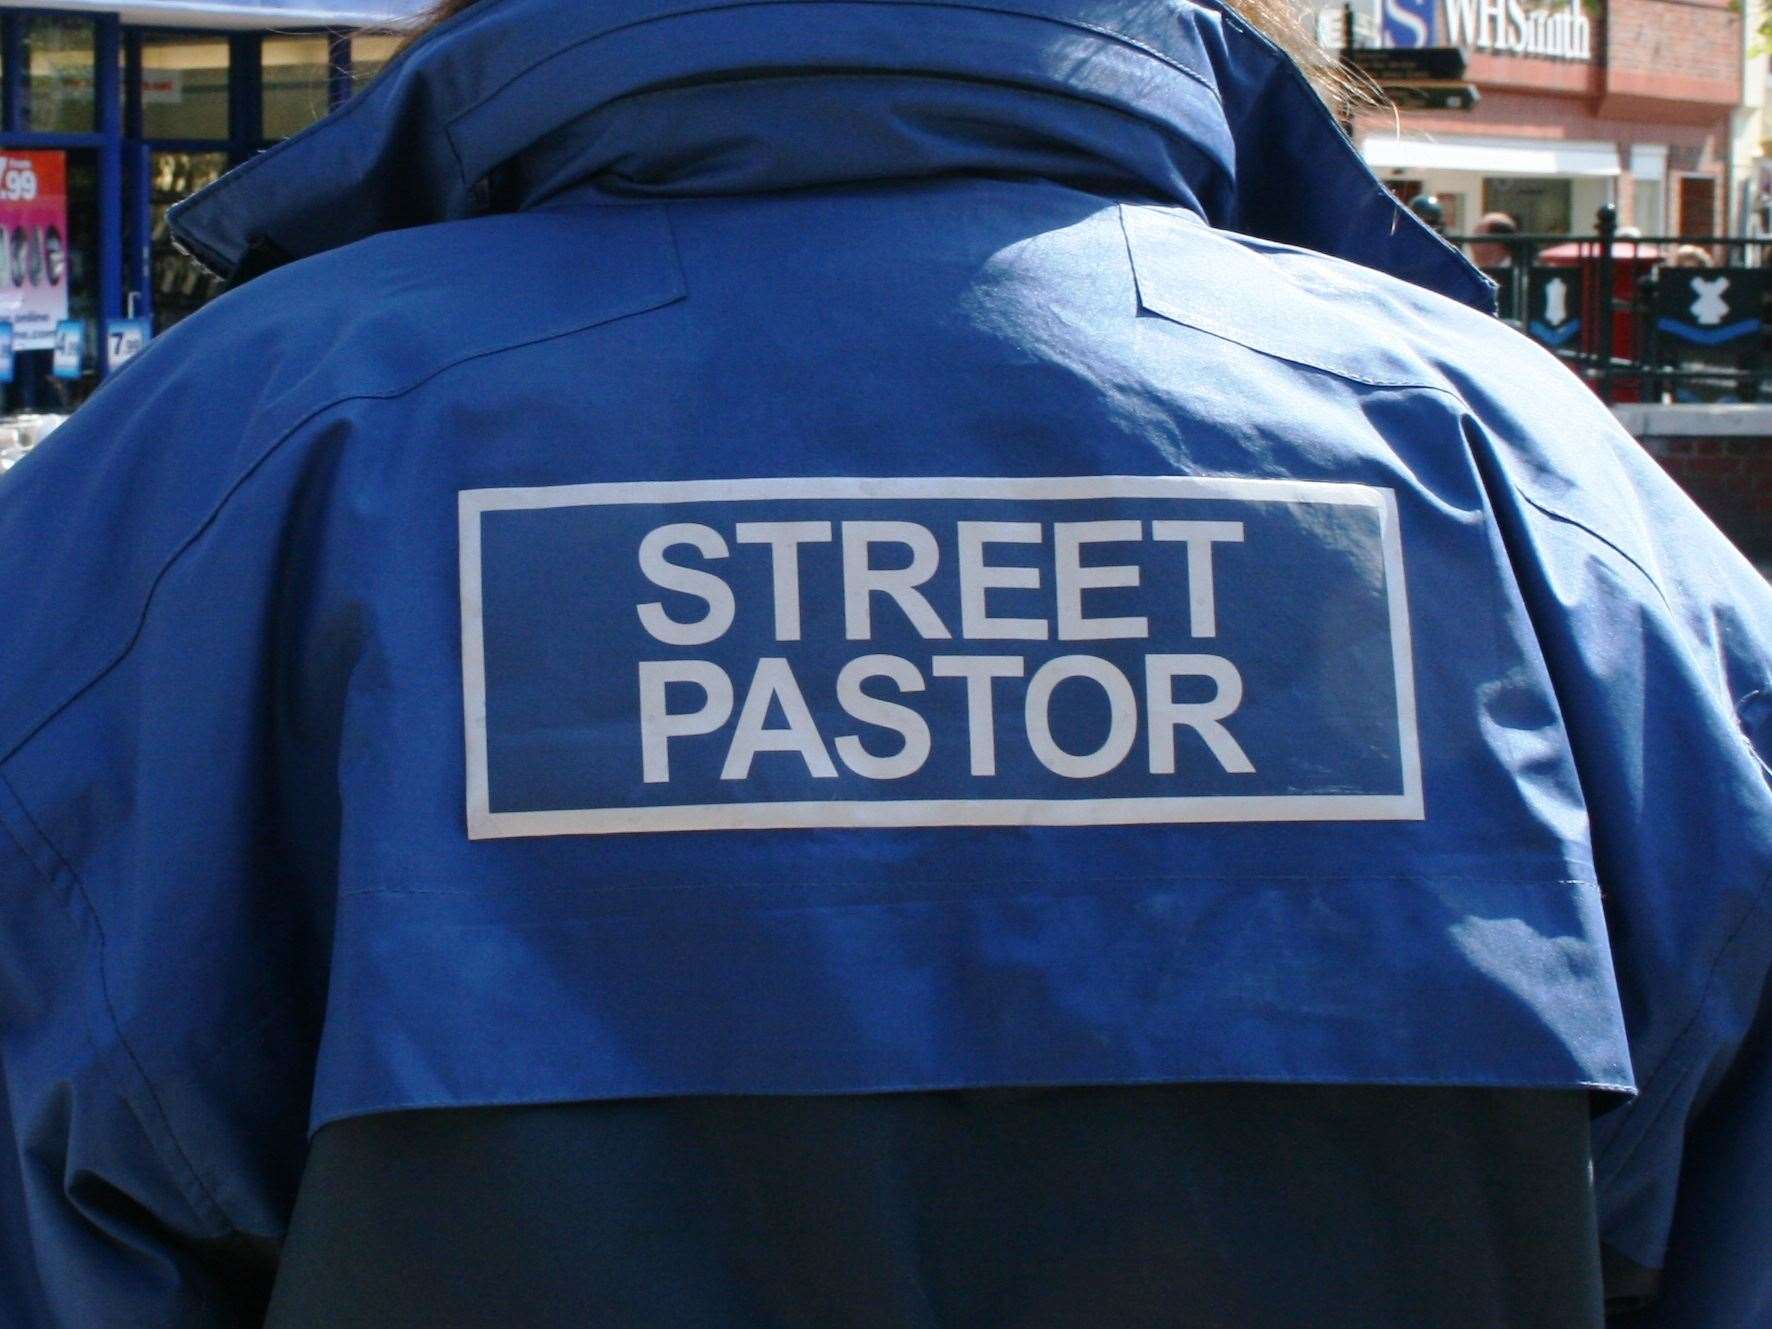 The Street Pastor scheme began in Dover 10 years ago. Library image